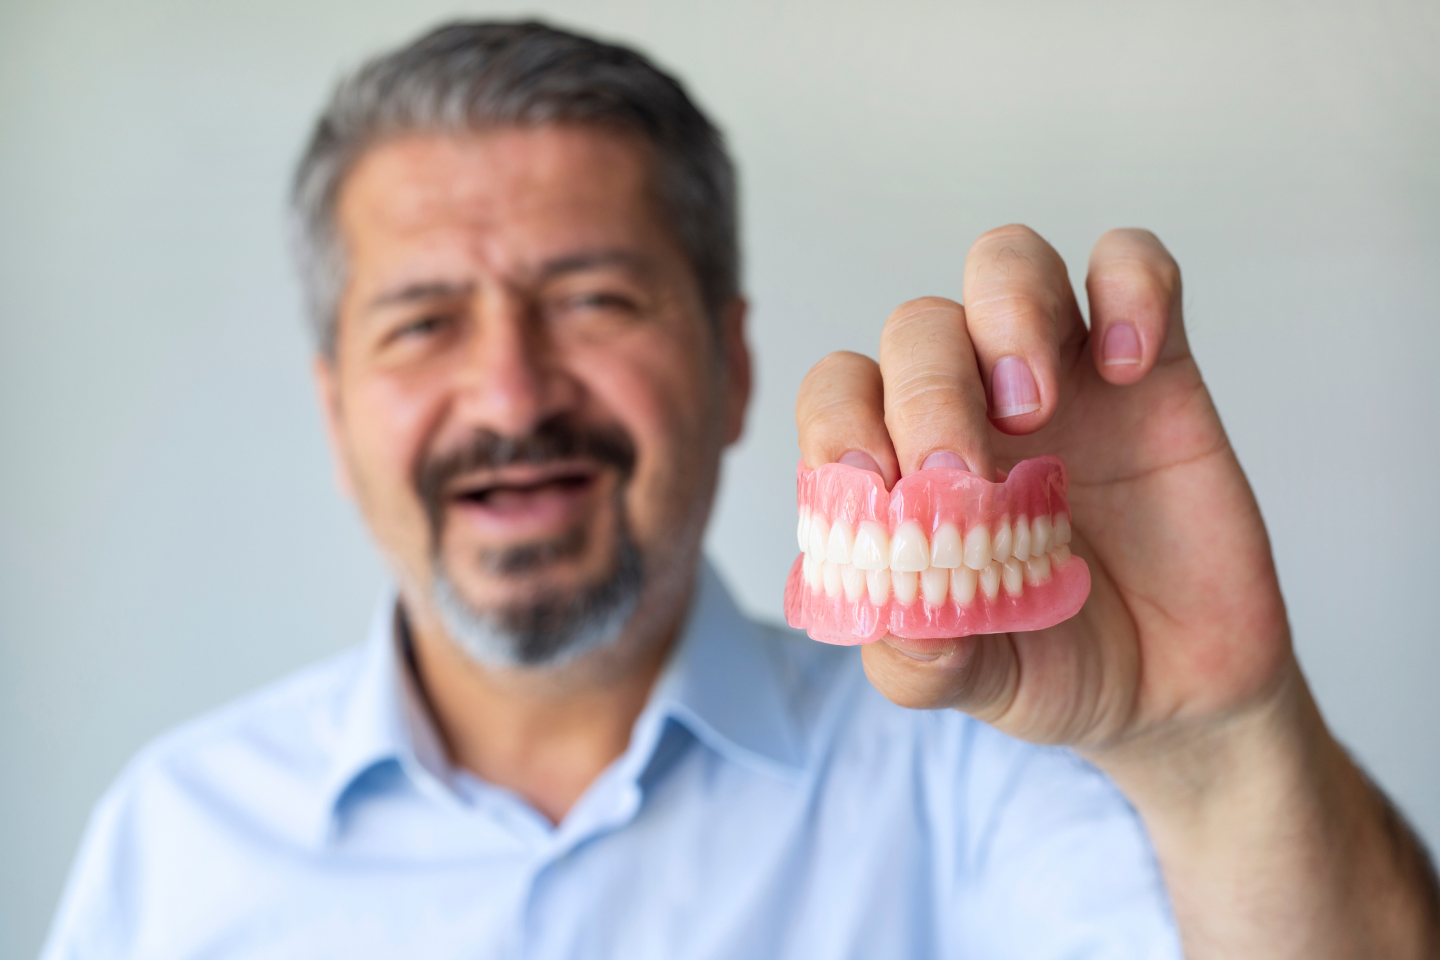 Regain your confidence with dentures from Star Dental Institute.